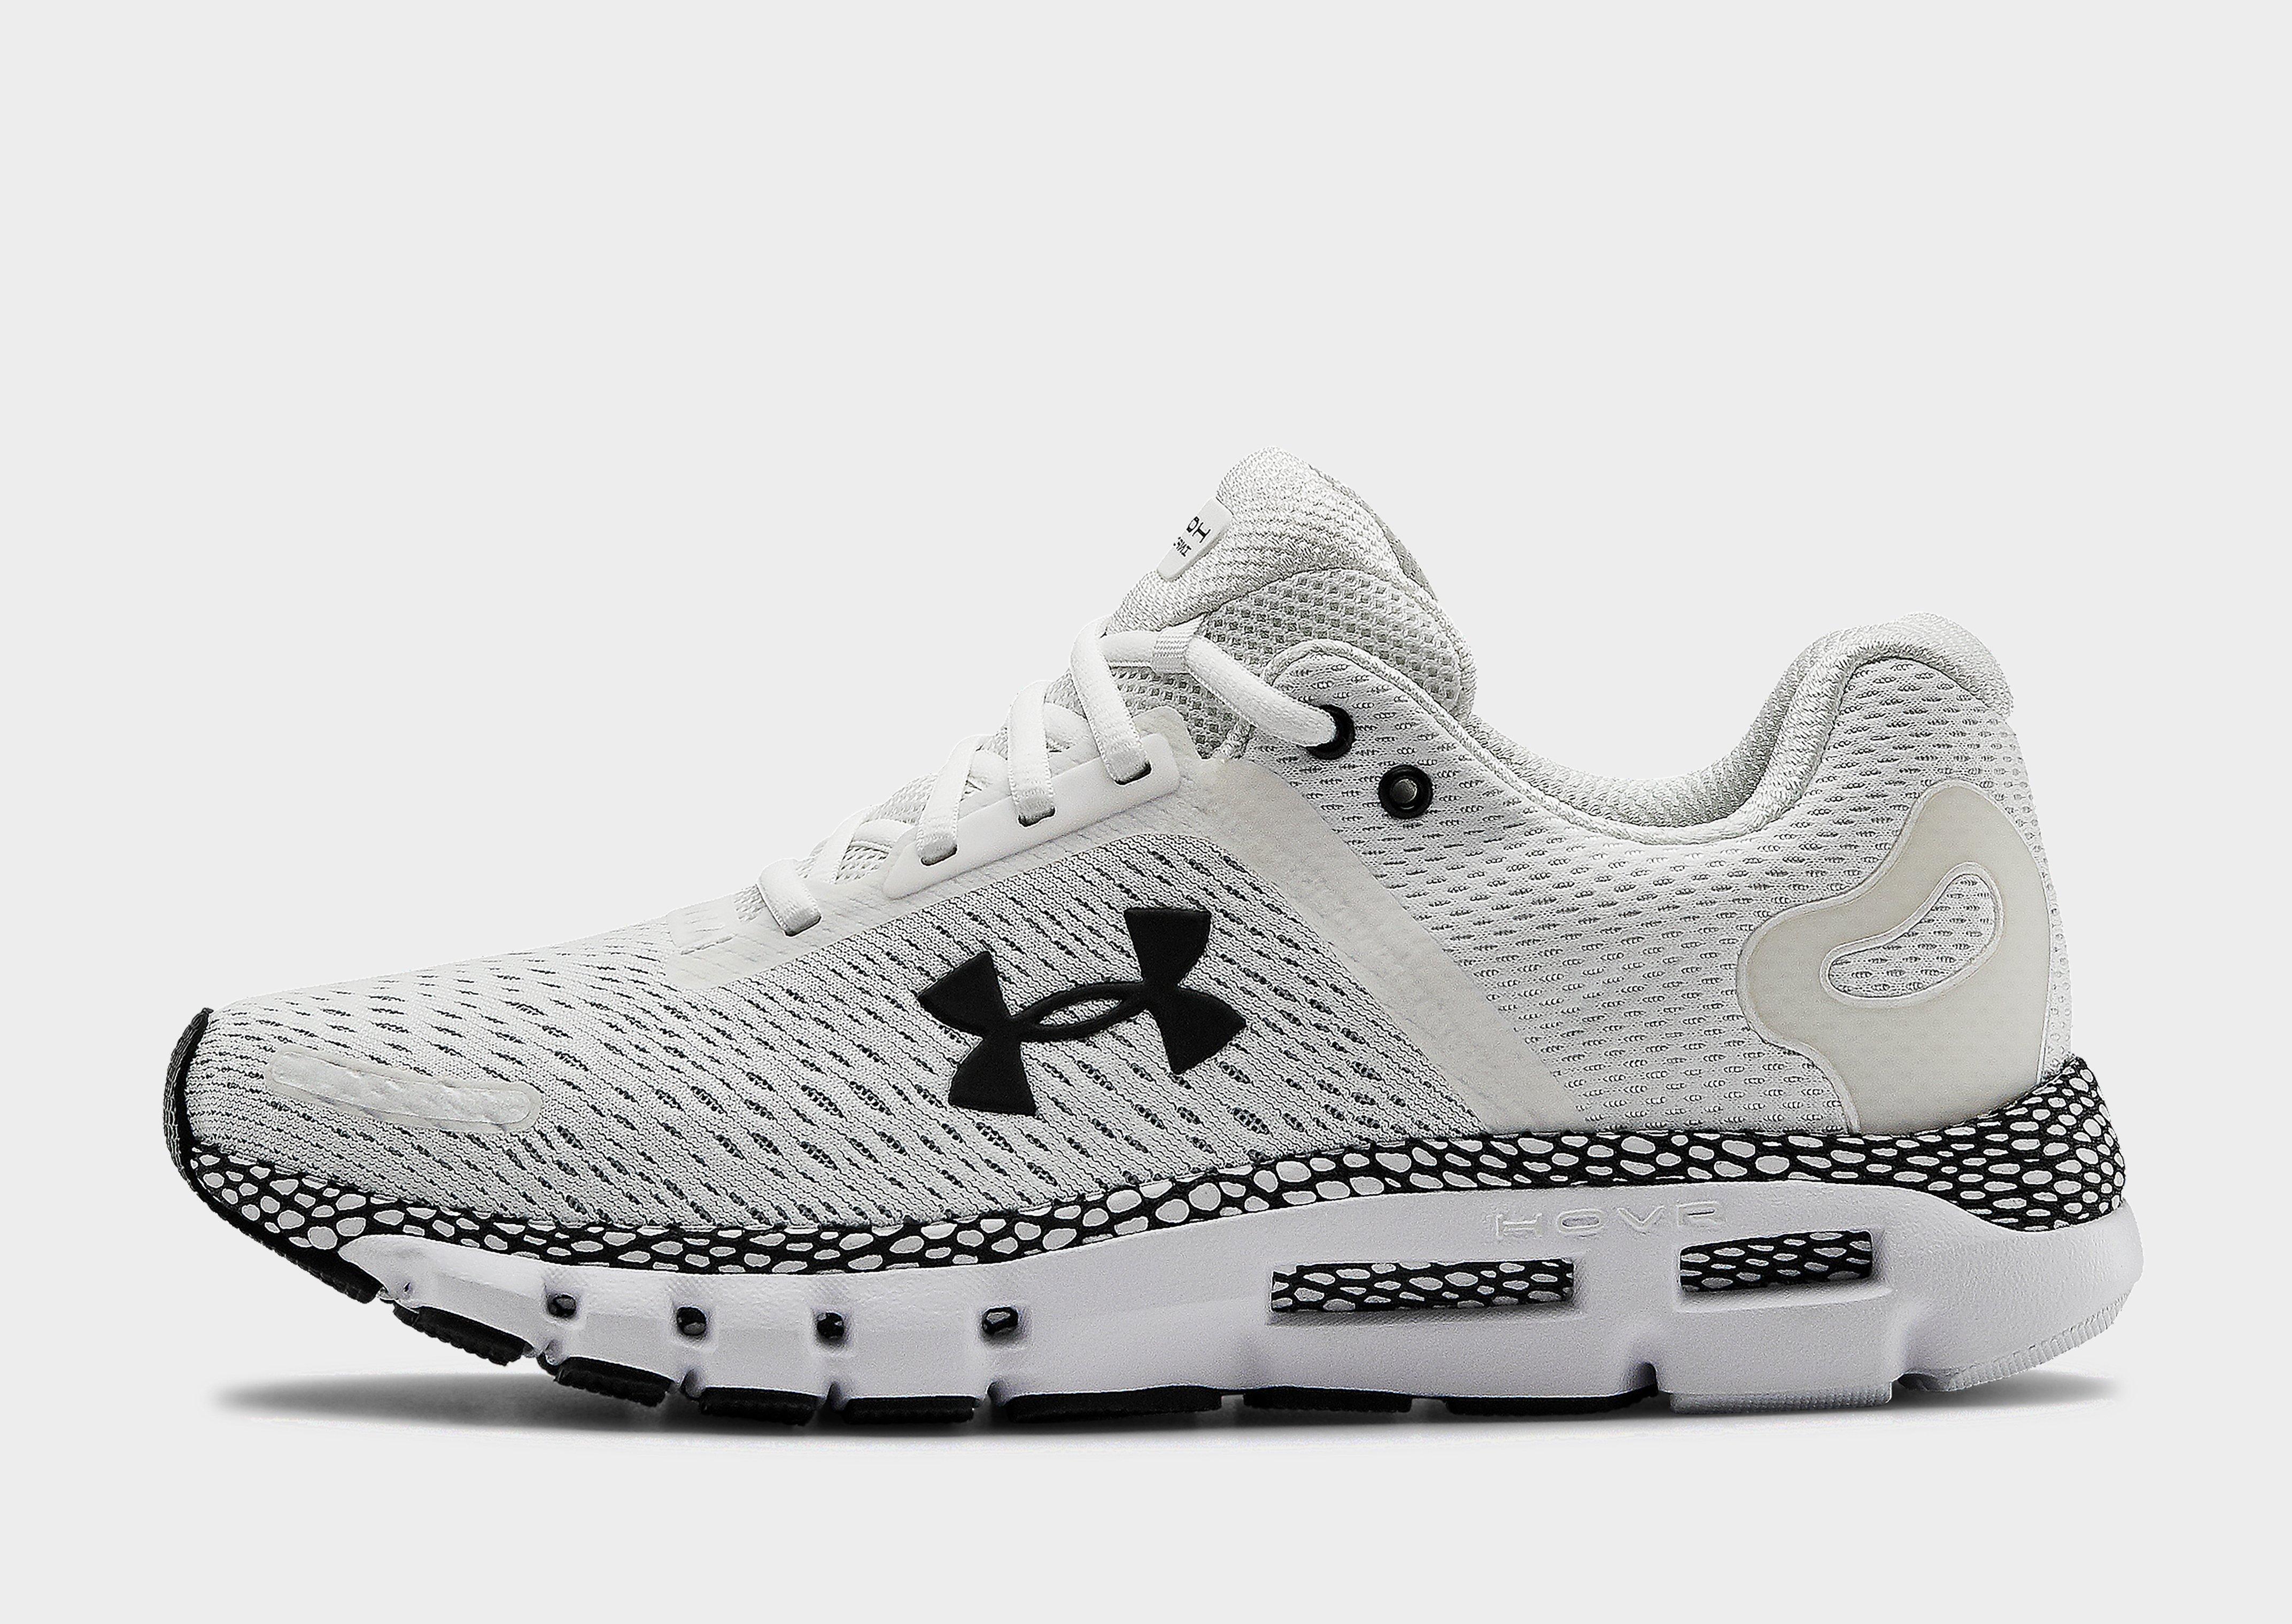 under armour hovr all white